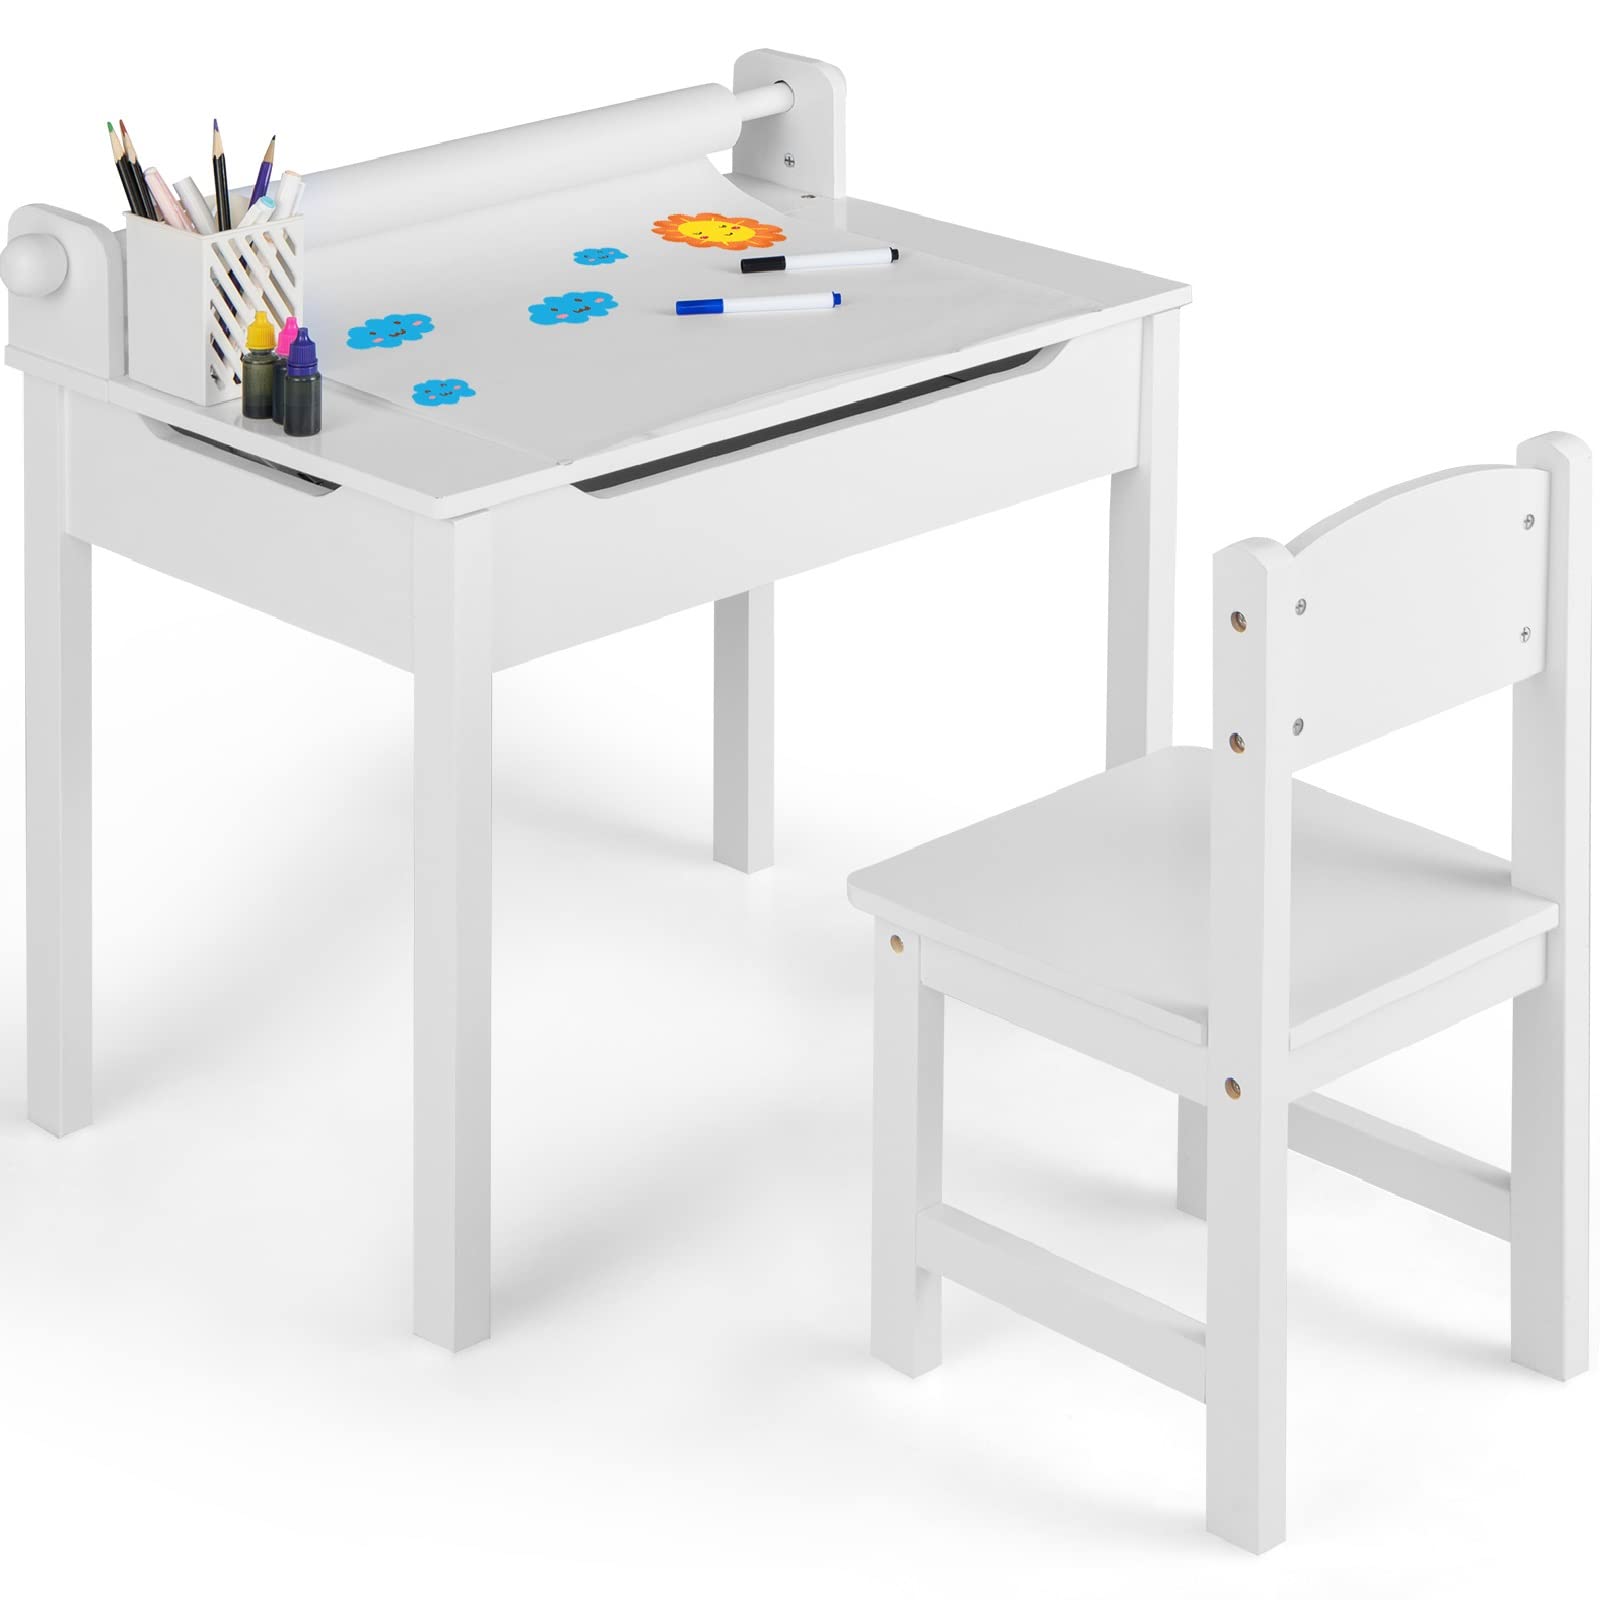 Childrens Table and Chairs, Kids Desk and Chair Set, Activity Table With  Roll Paper Holder 